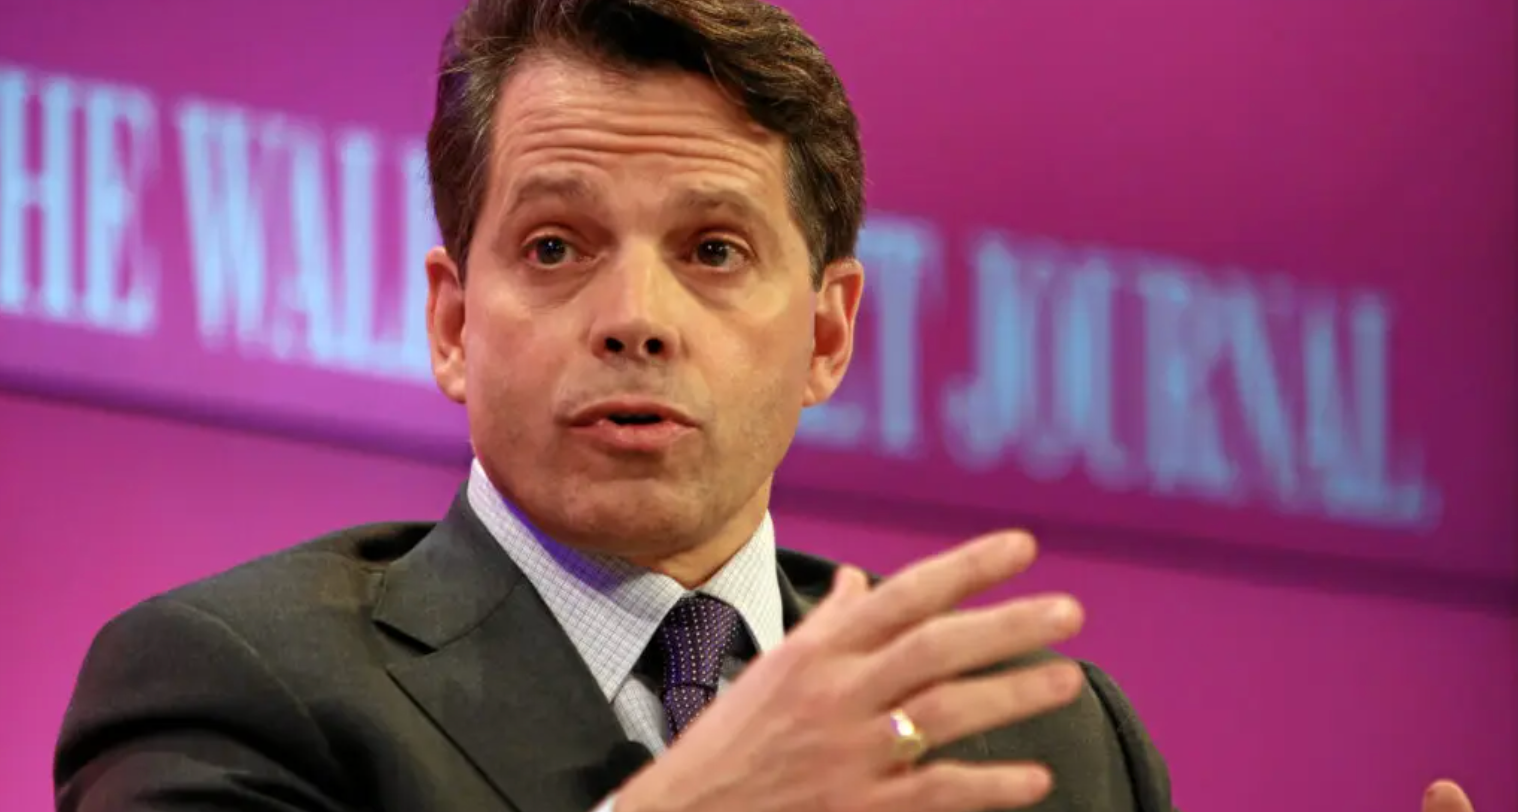 Anthony Scaramucci Invests In Former FTX US CEO's New Company: 'Go Forward. Don't Look Back'